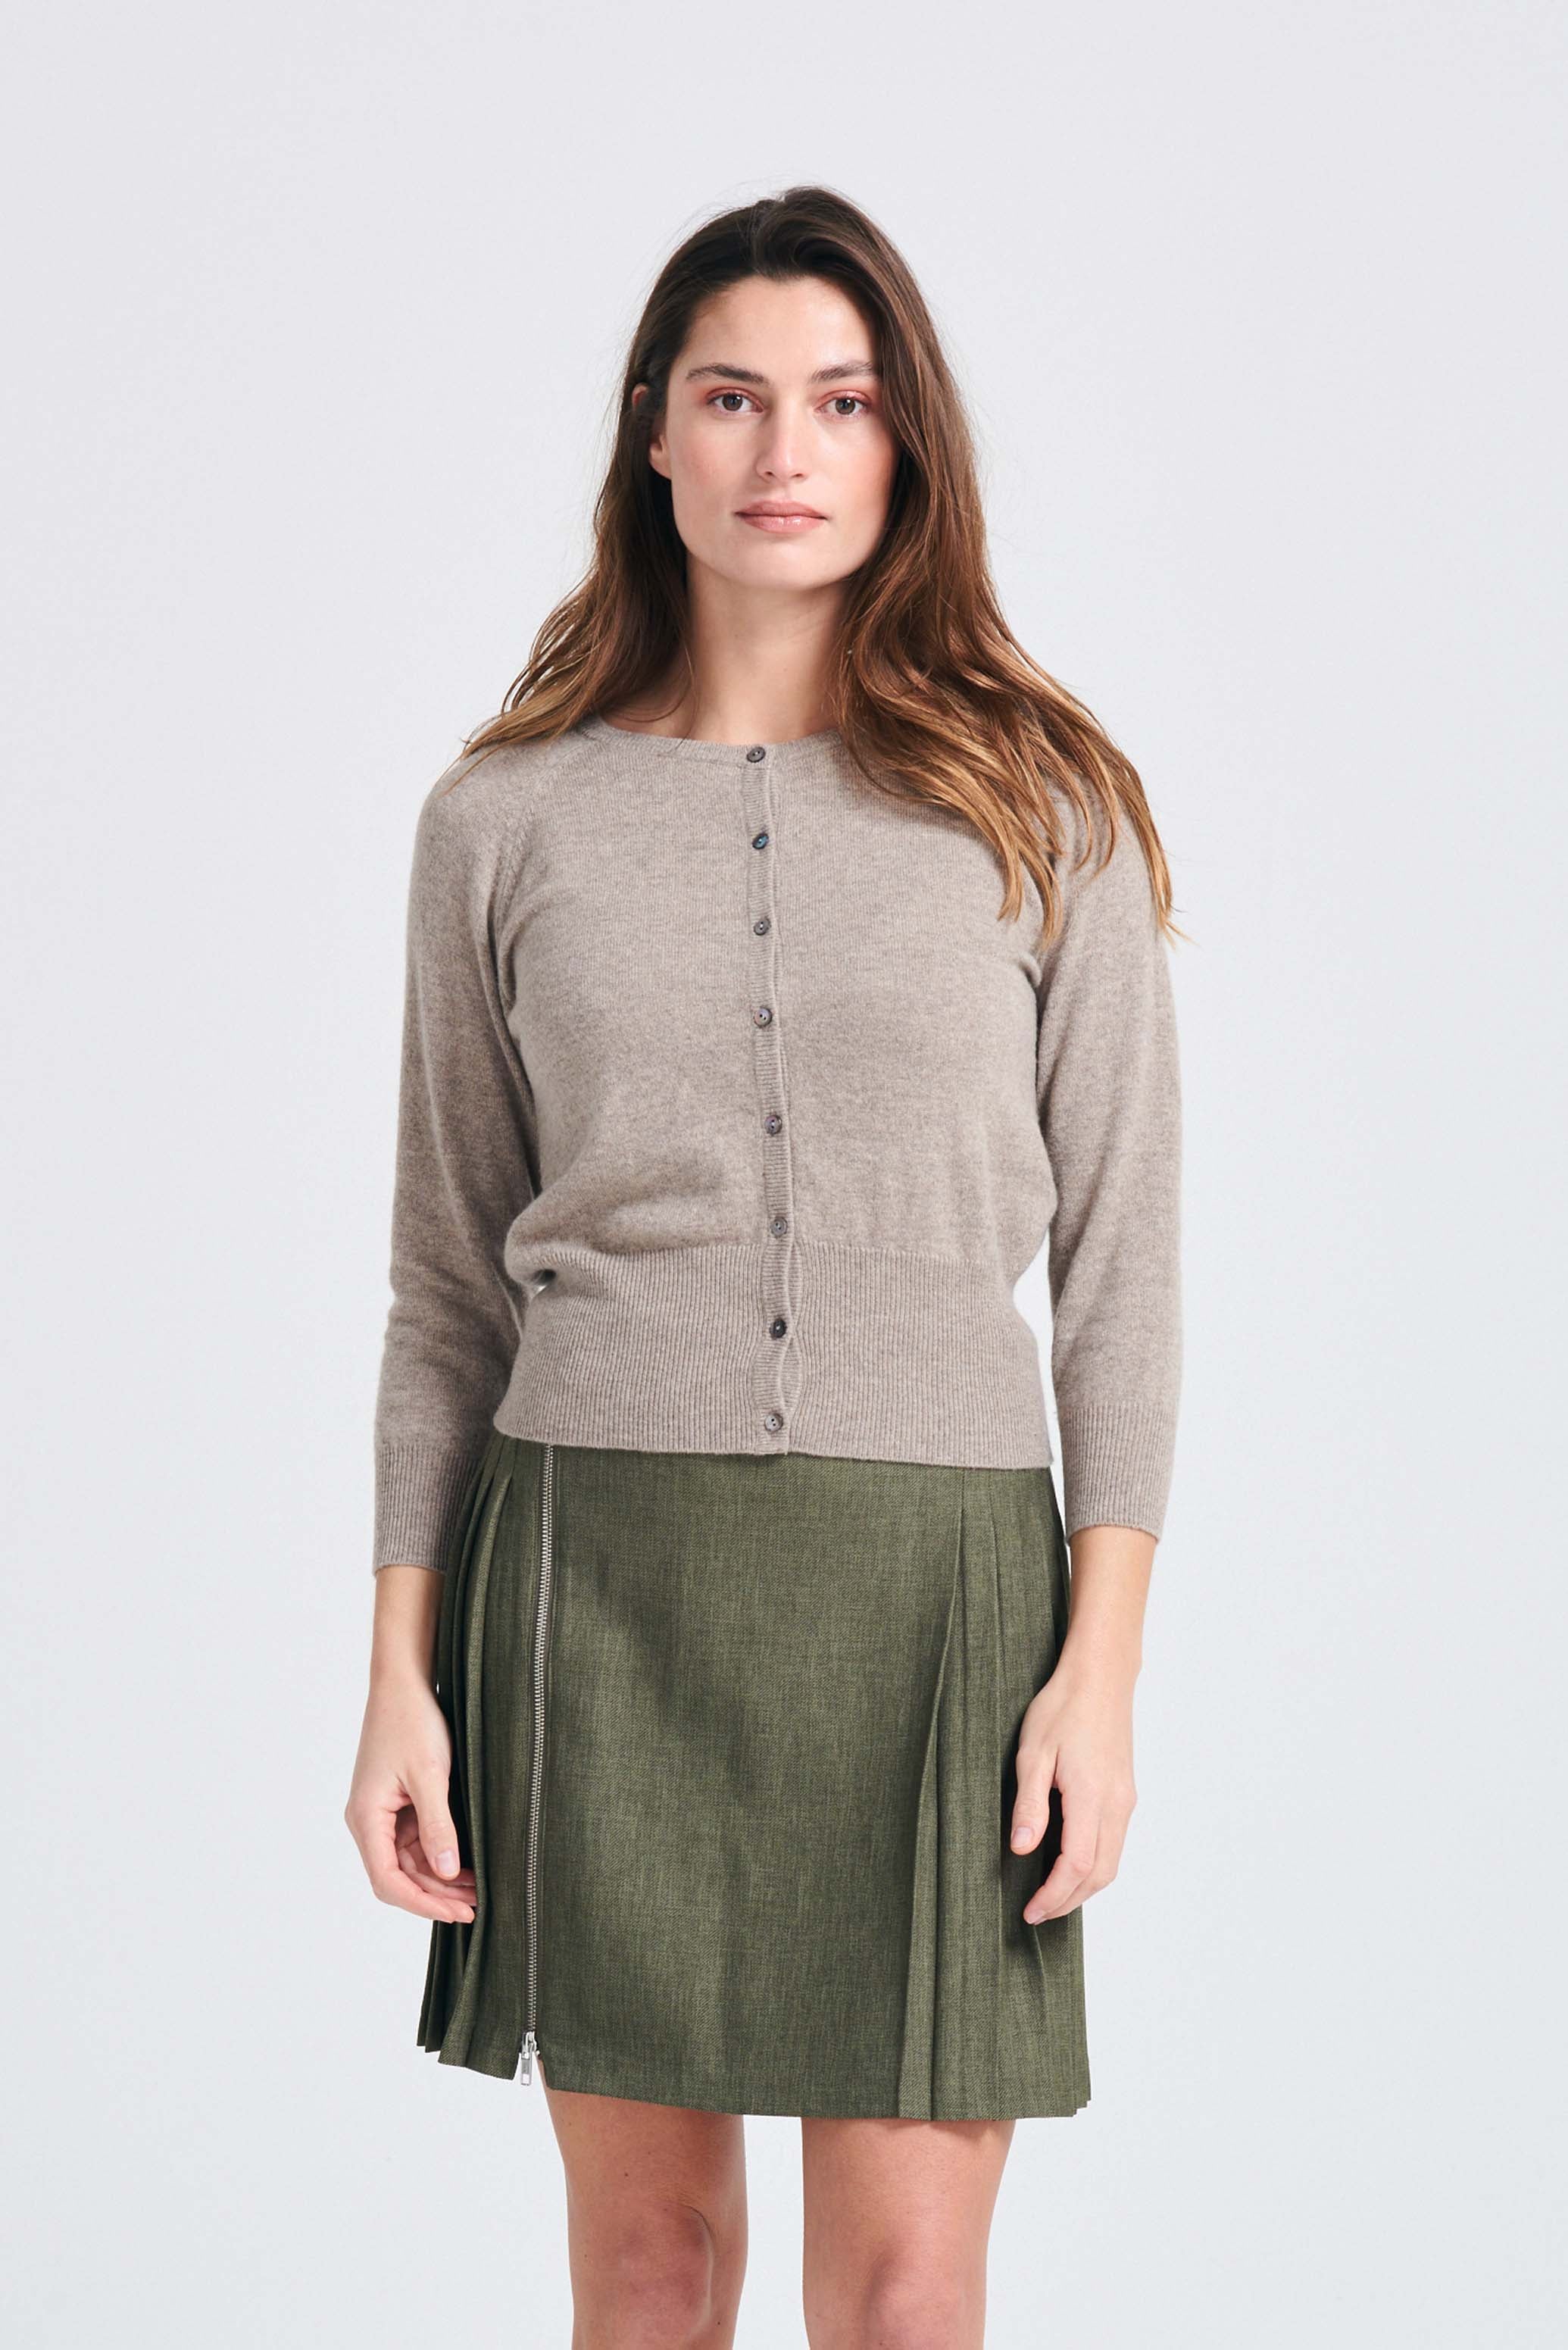 Brown haired female model wearing Jumper1234 neat fit cashmere round neck cardigan in organic light brown